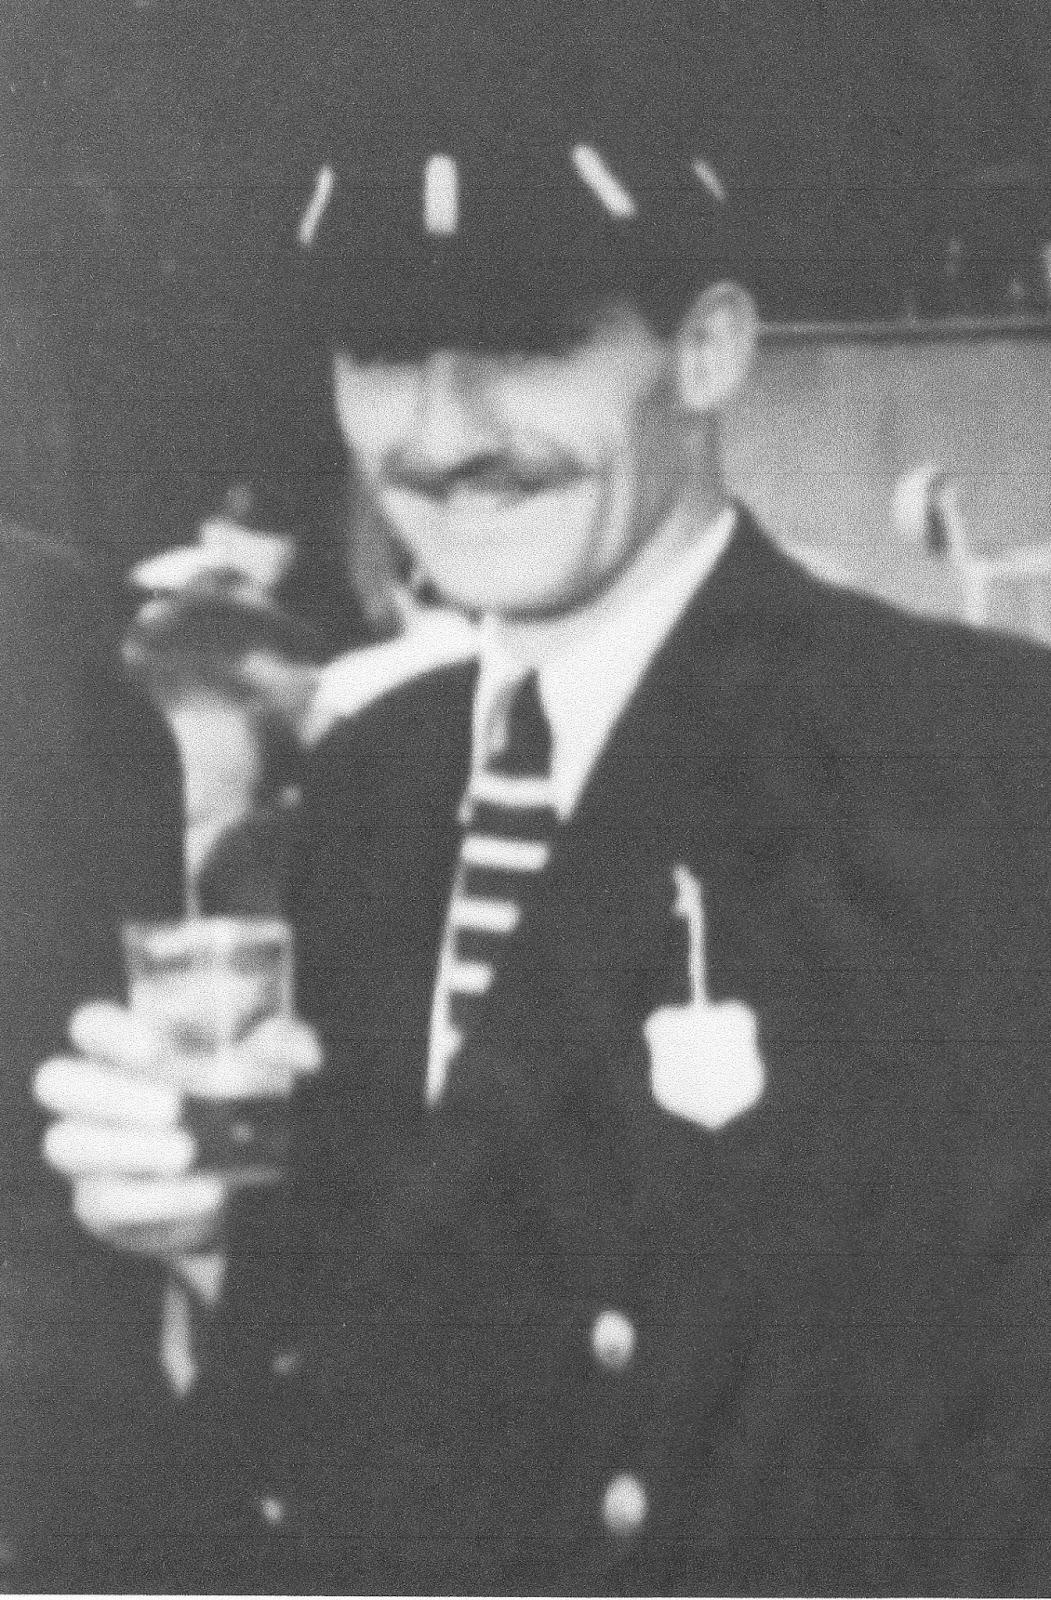 Graham Hill in London RC cap and tie at Henley.